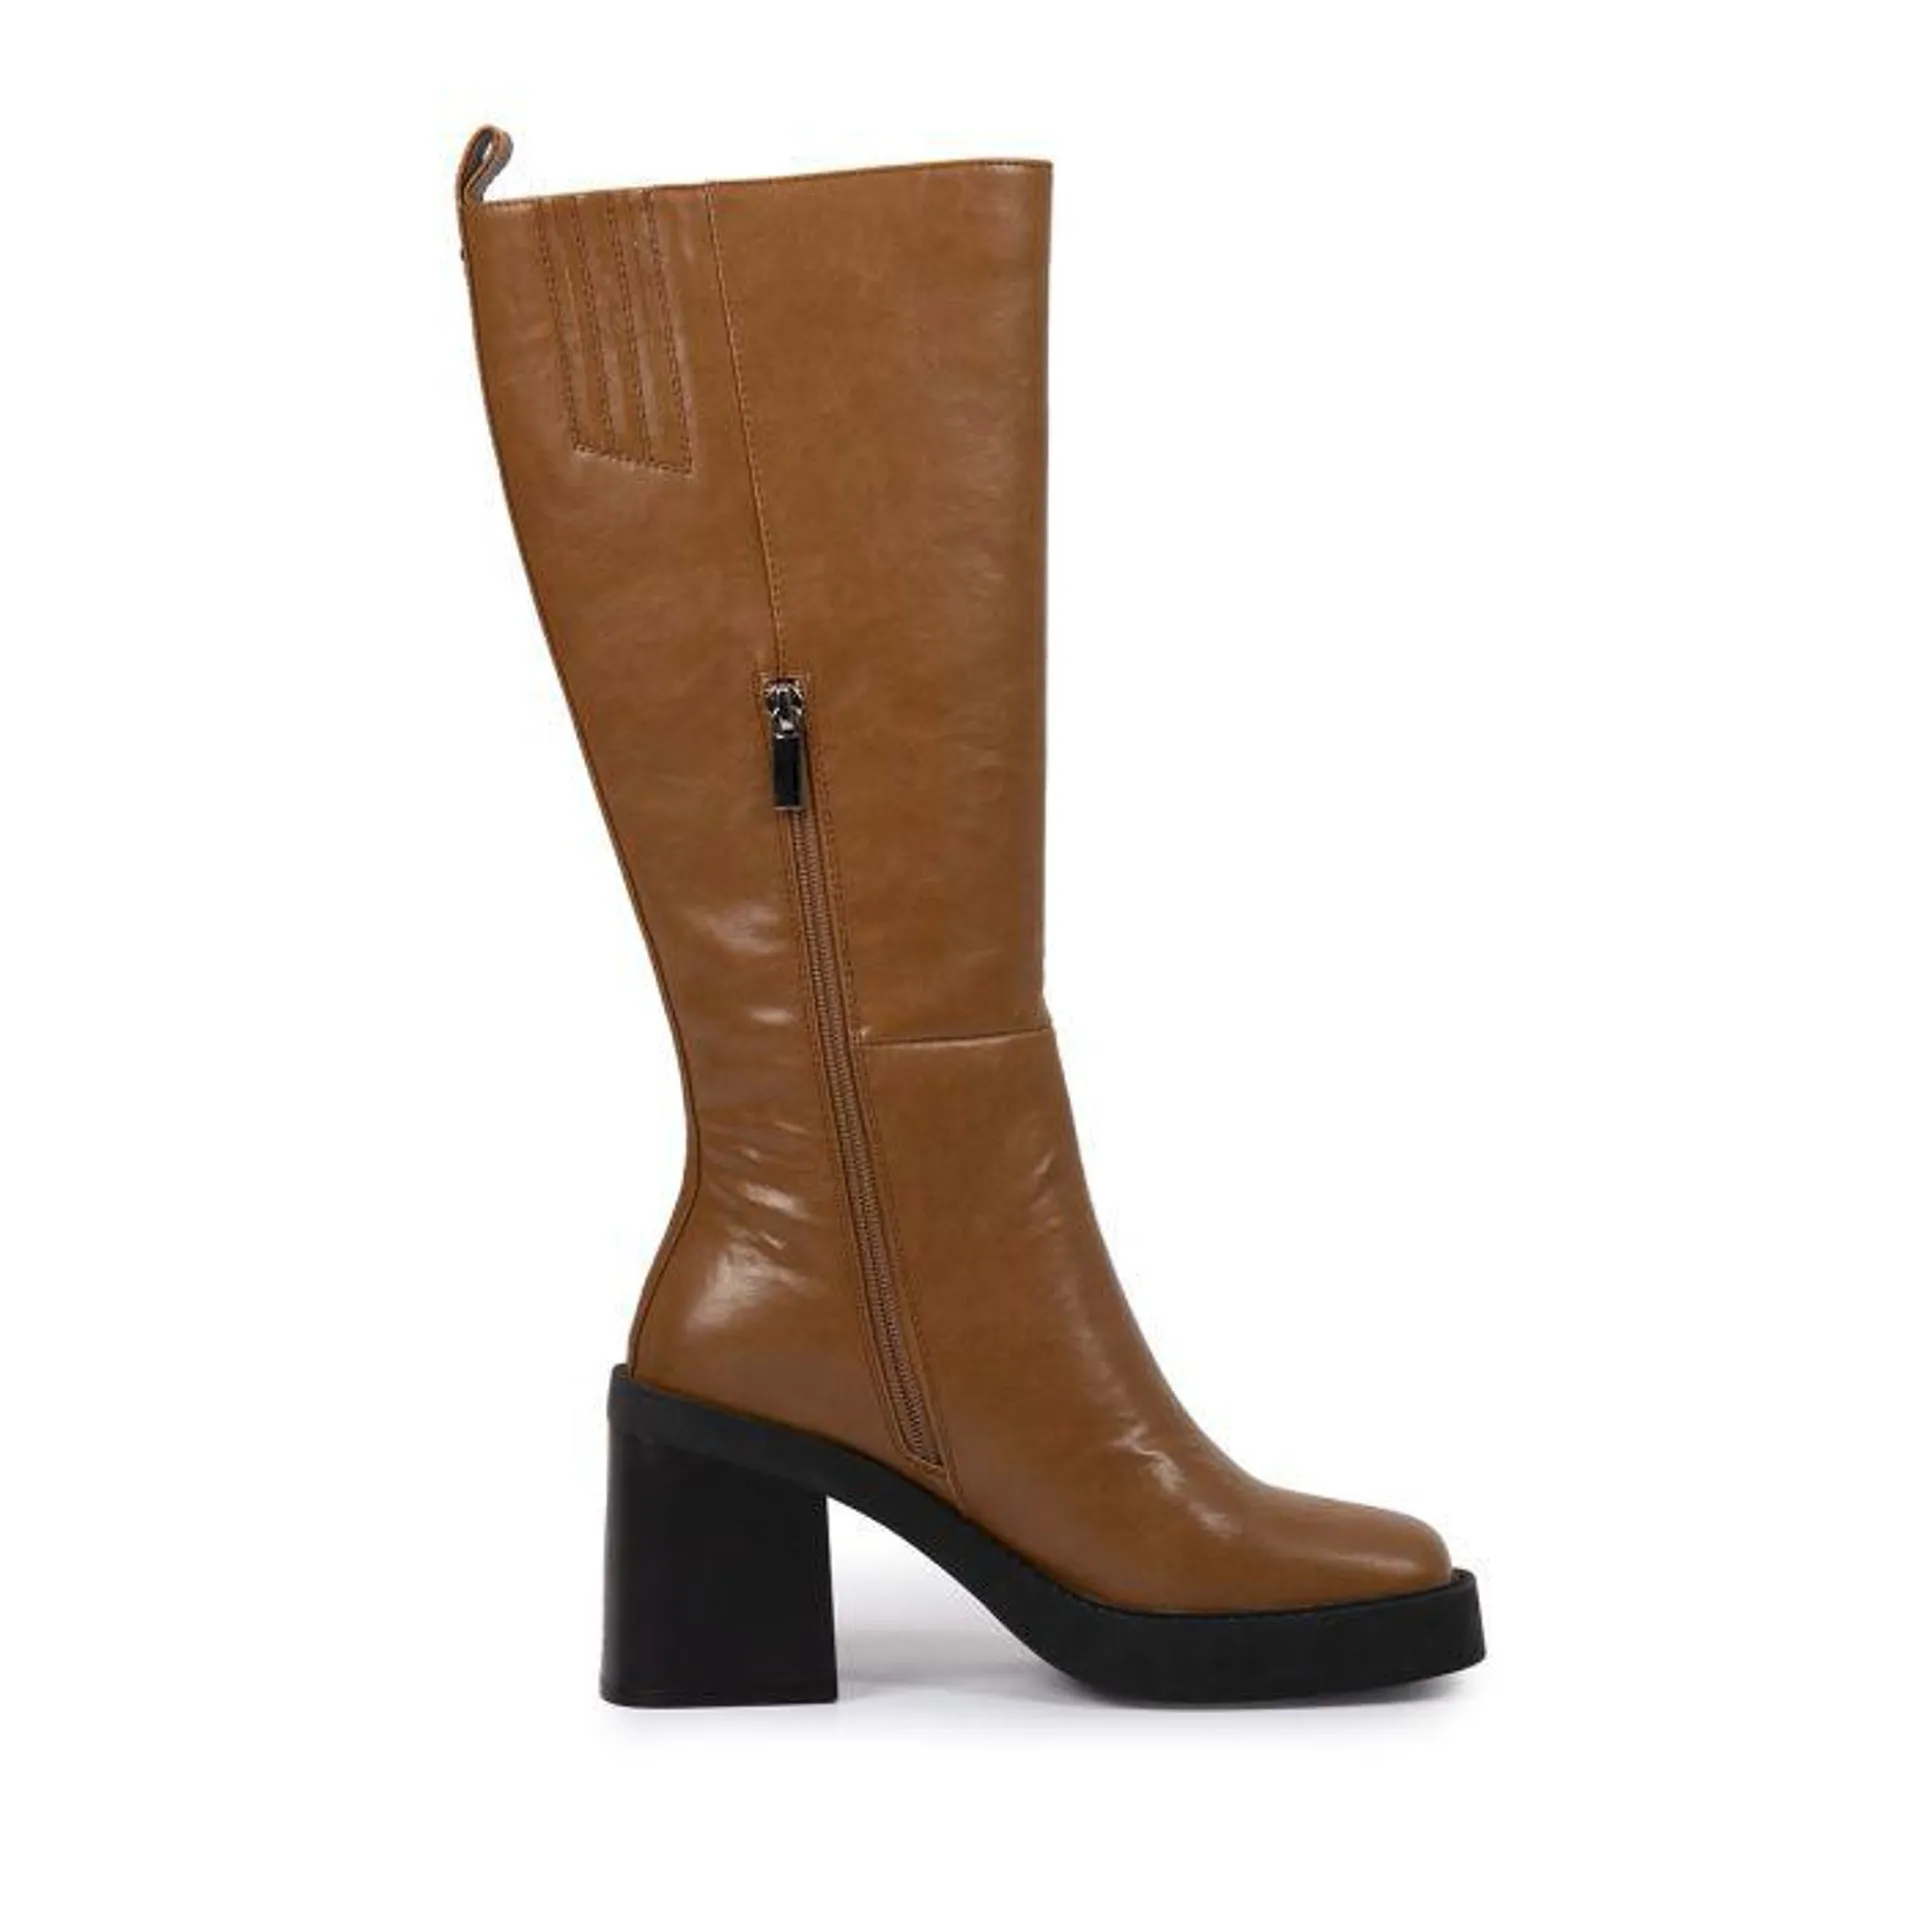 Goeblange women's straight tan knee-high boots with square toes, a thick platform and wide heels